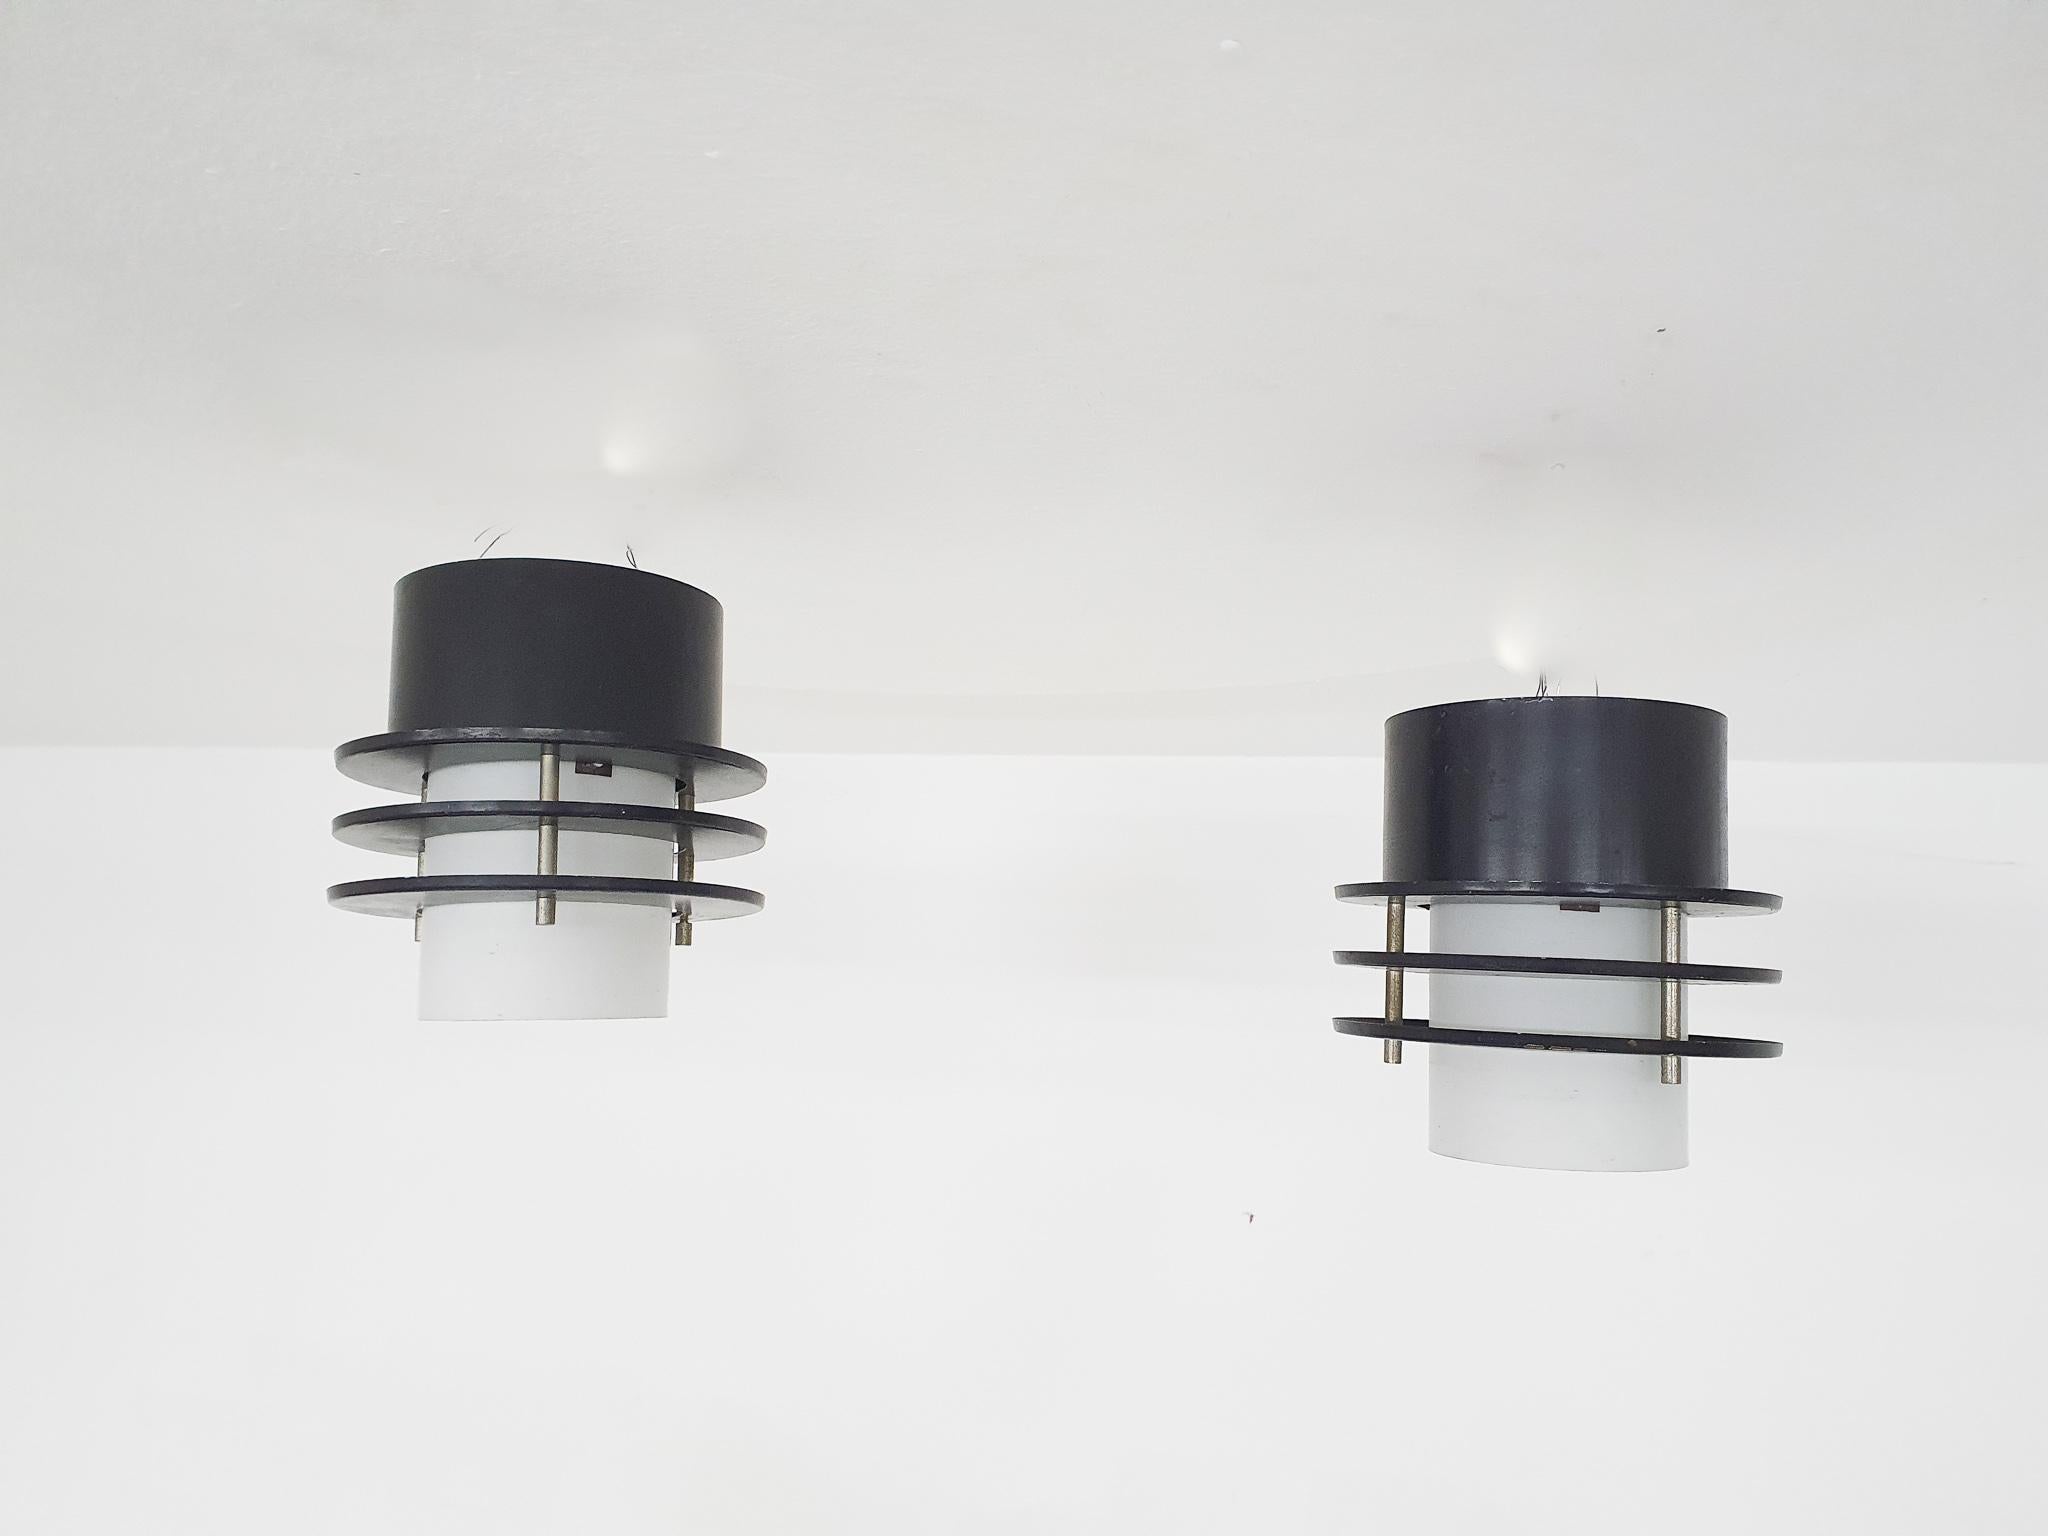 Set of Two Minimalistic Ceiling Lights in Glass and Metal, the Netherlands '60s For Sale 6